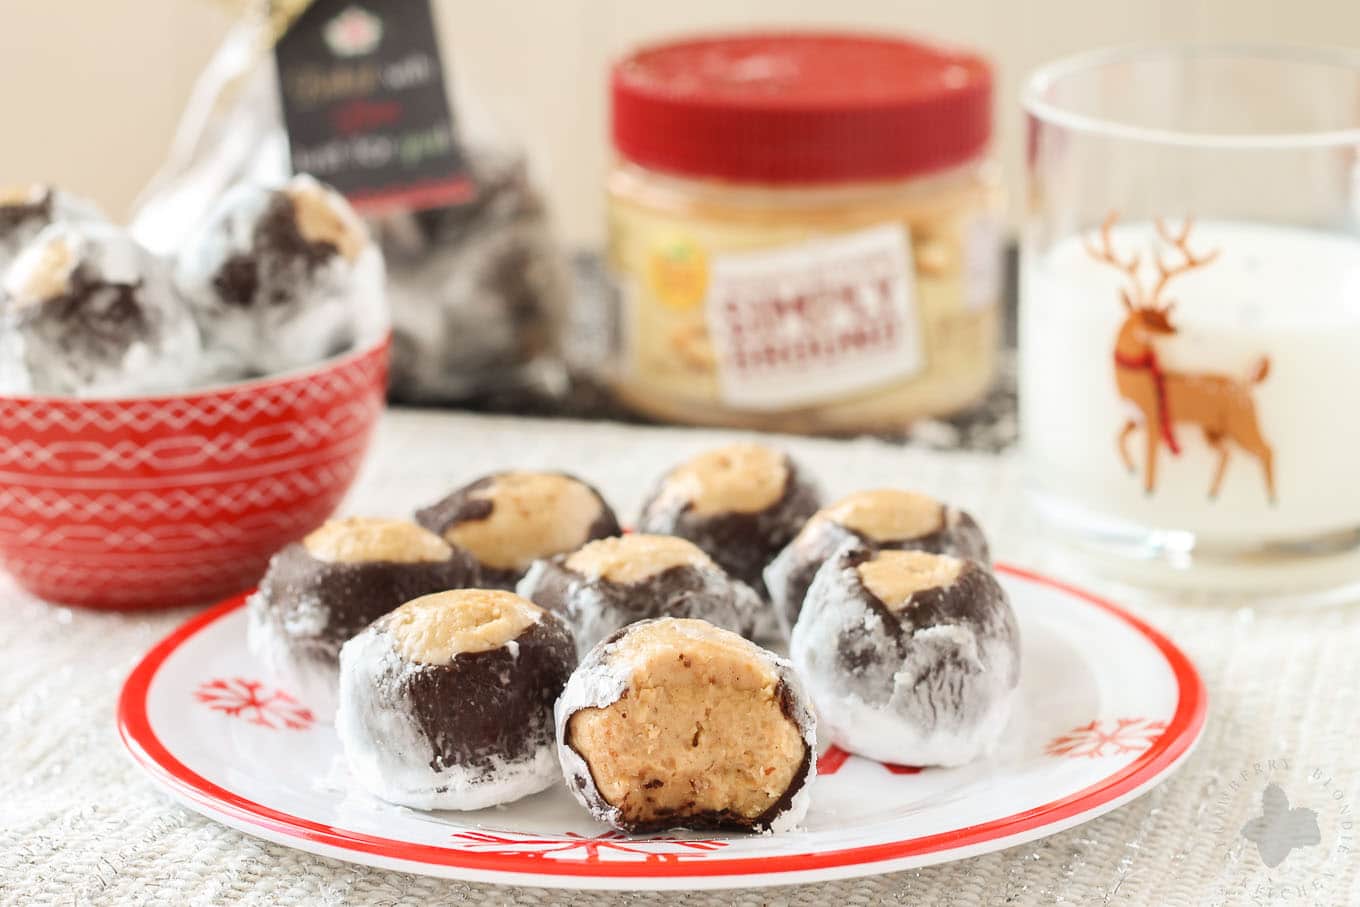 Creamy with a little bit of crunch, Peter Pan® Simply Ground Peanut Butter works beautifully in these Puppy Chow Truffles. Peanut butter balls dipped in chocolate and rolled in powdered sugar are the perfect treat to pass out to all your friends, family and coworkers this holiday season. Bonus-free printable holiday cookie gift tag! No excuses! | Strawberry Blondie Kitchen